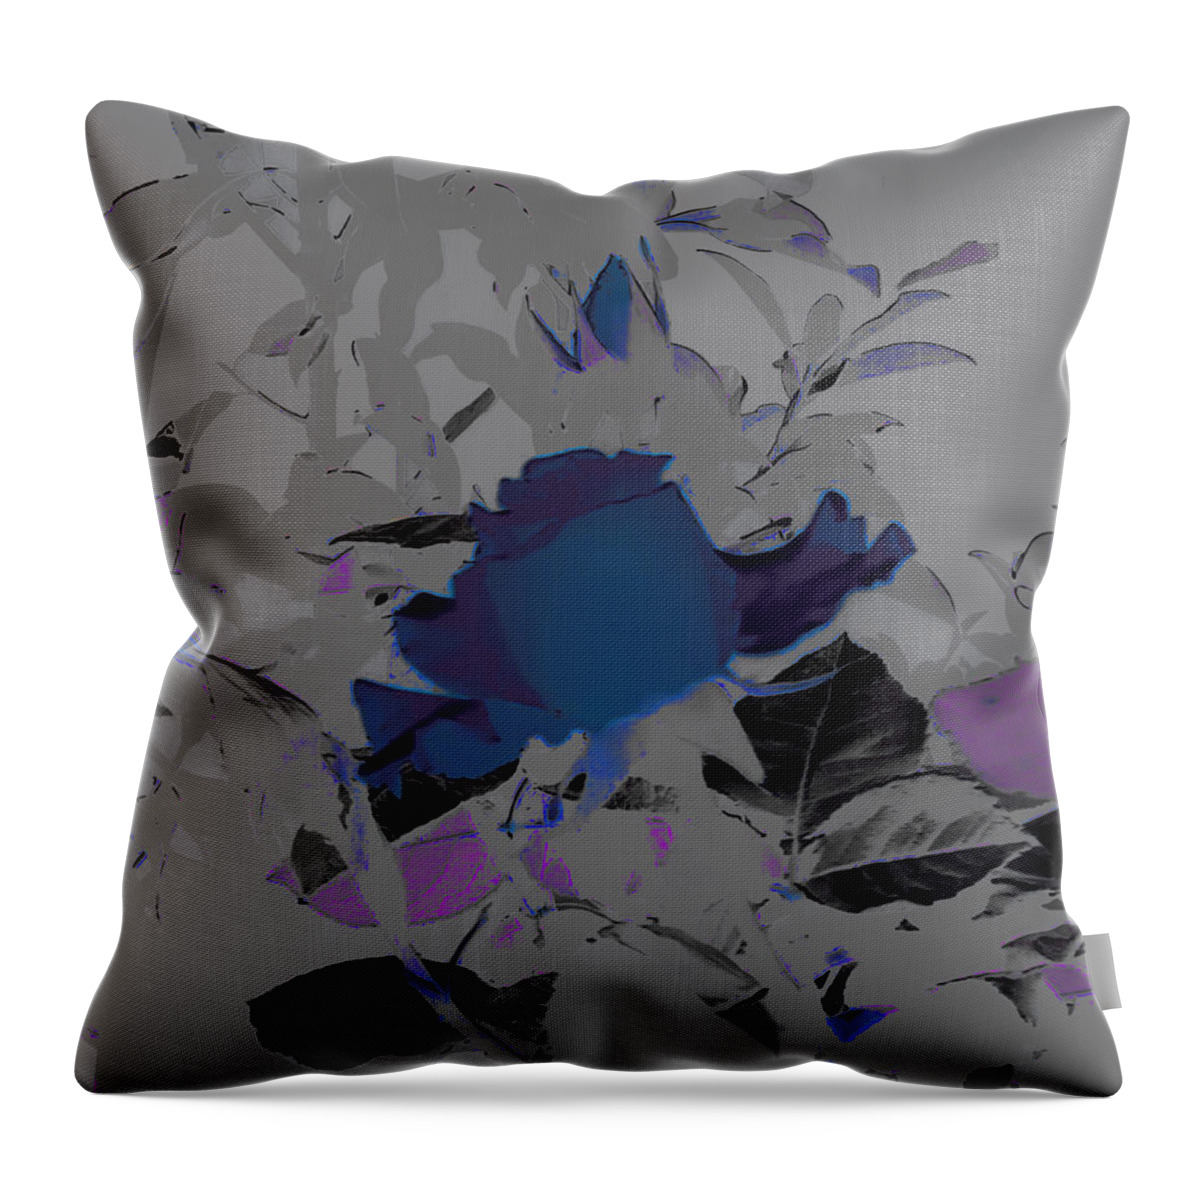 Flowers Throw Pillow featuring the digital art Blue Blossom by Asok Mukhopadhyay